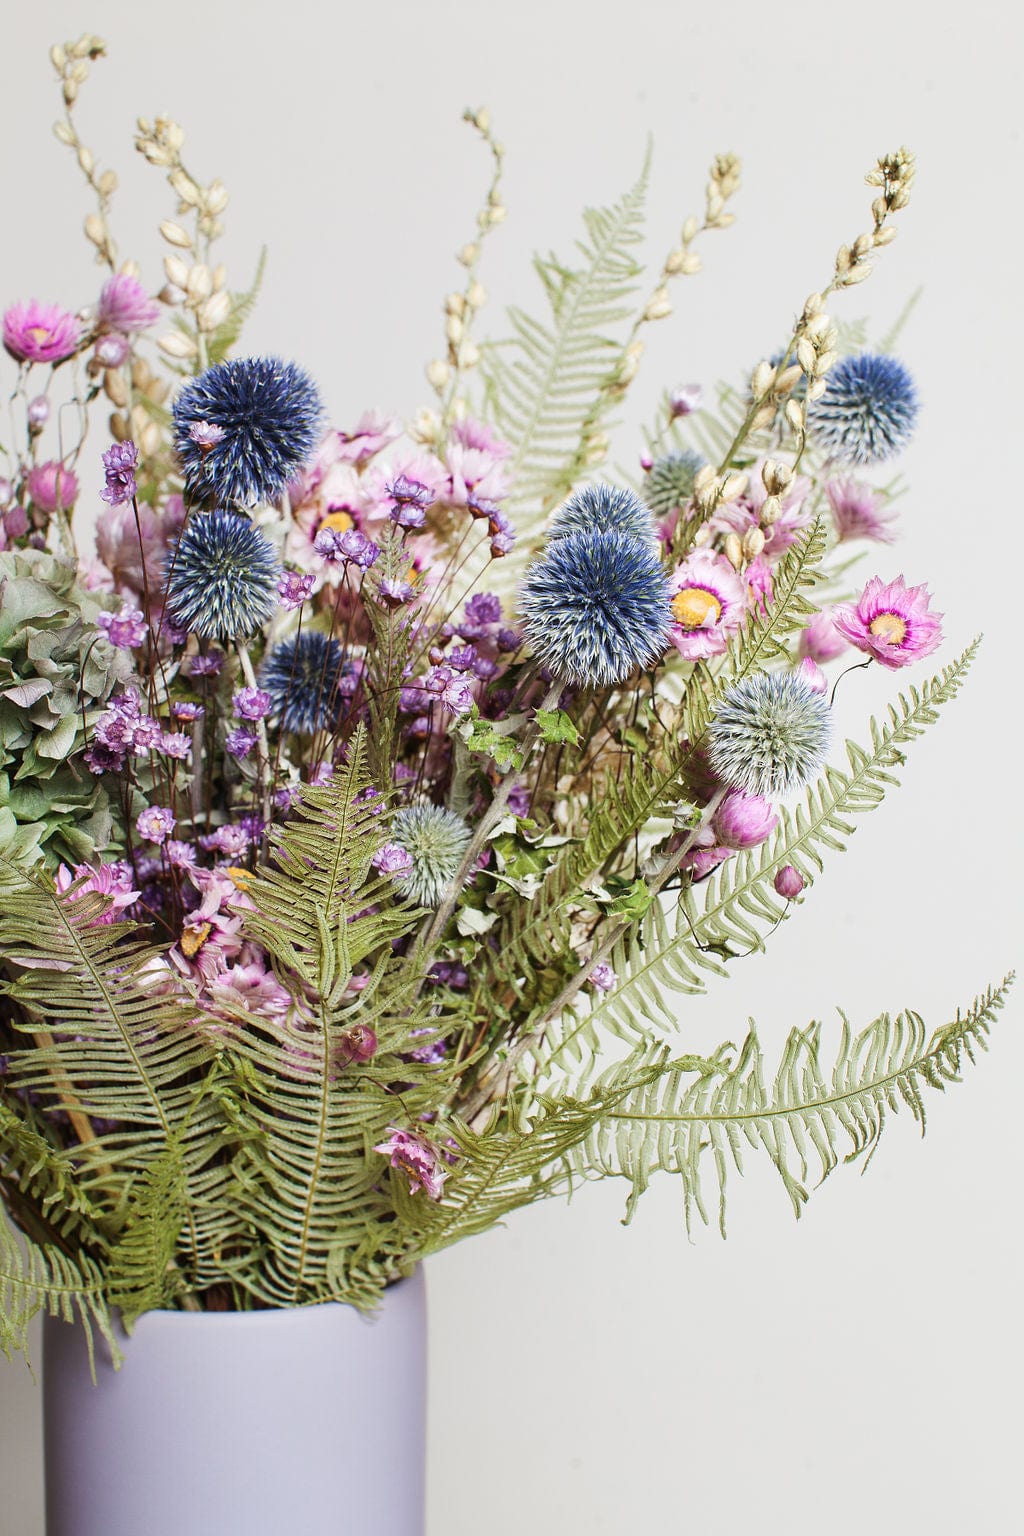 Winter flowers: A season of ethereal beauty – Humble Bouquet